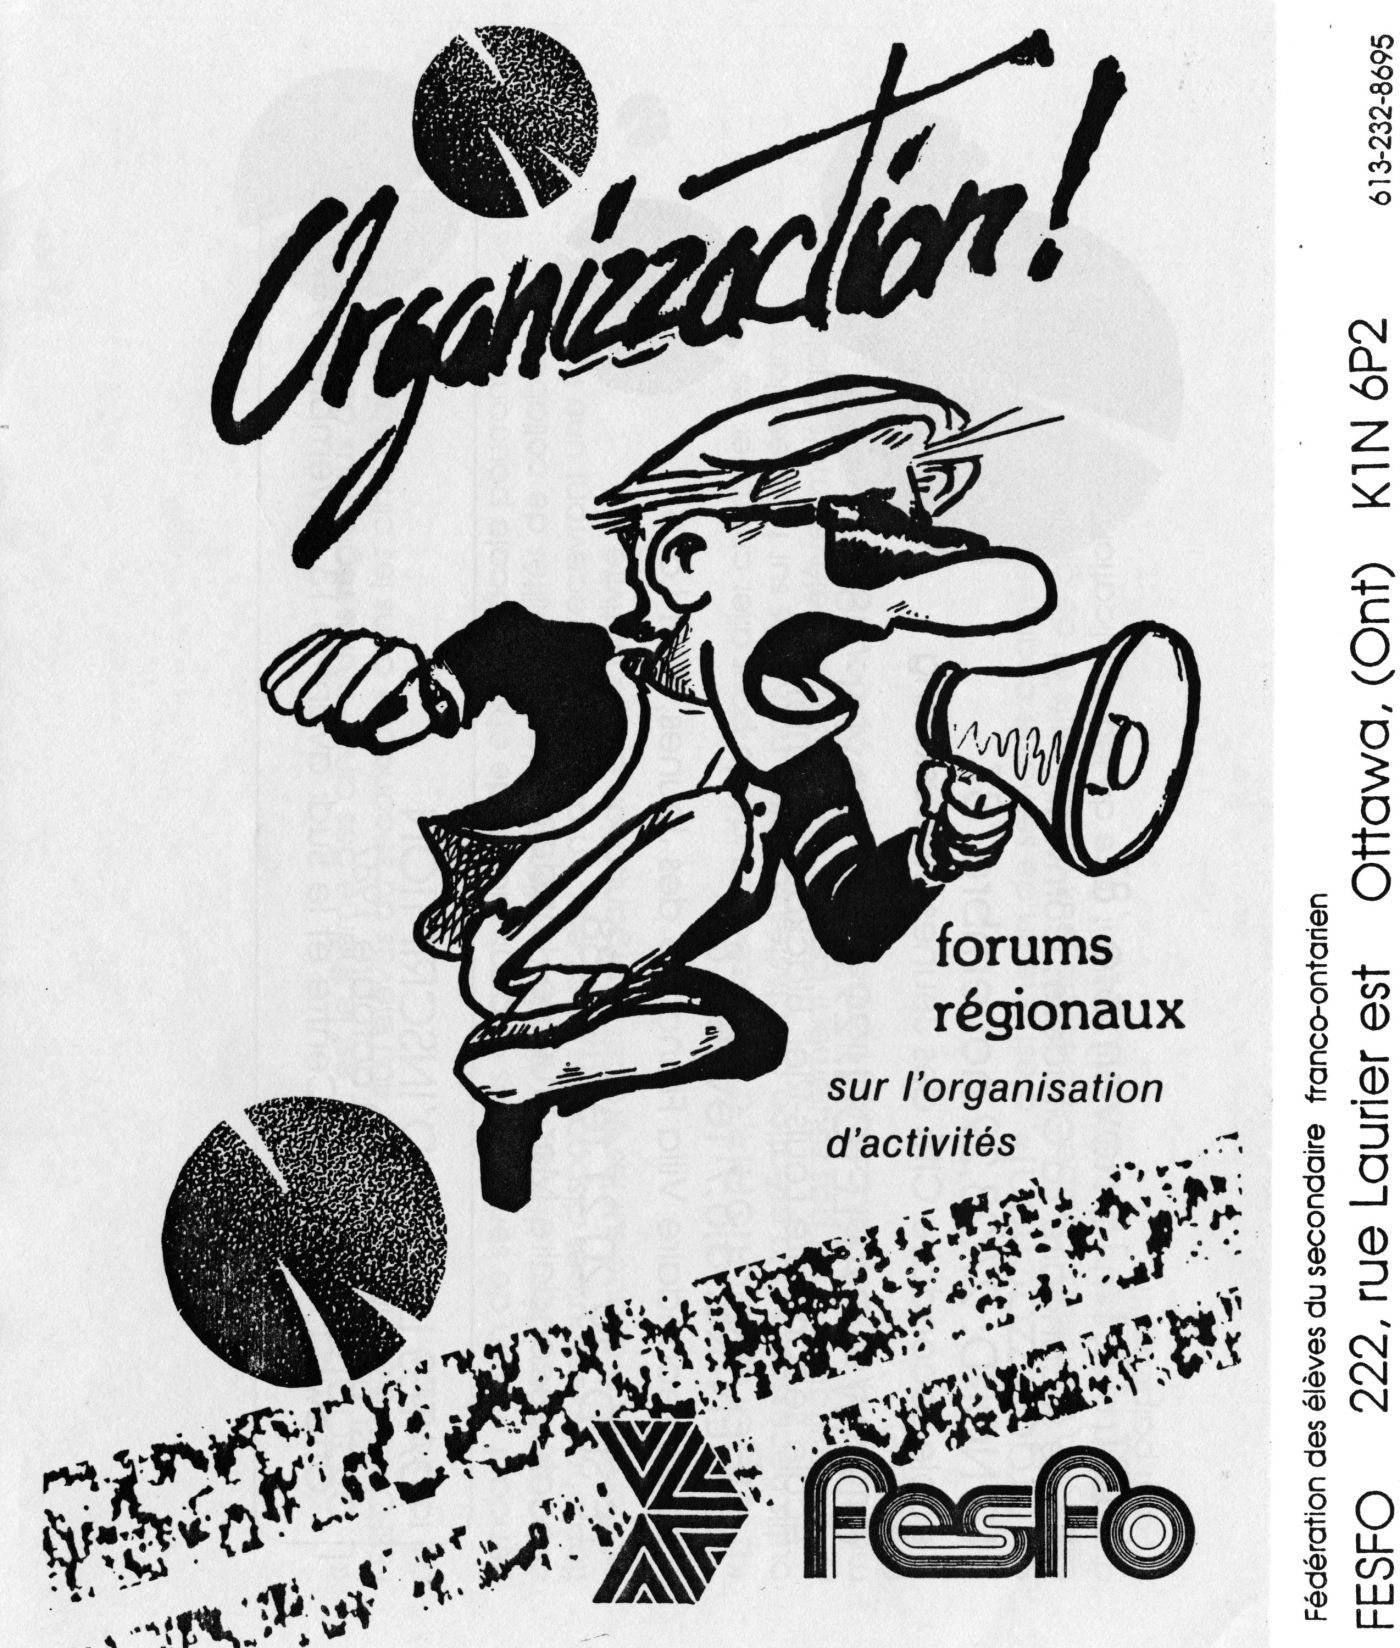 First page of a black and white French document. A caricature of a frantic young man holding a megaphone, under which features the event name and FESFO’s logo. Vertically, on the right side, the organization's name, address and phone number.